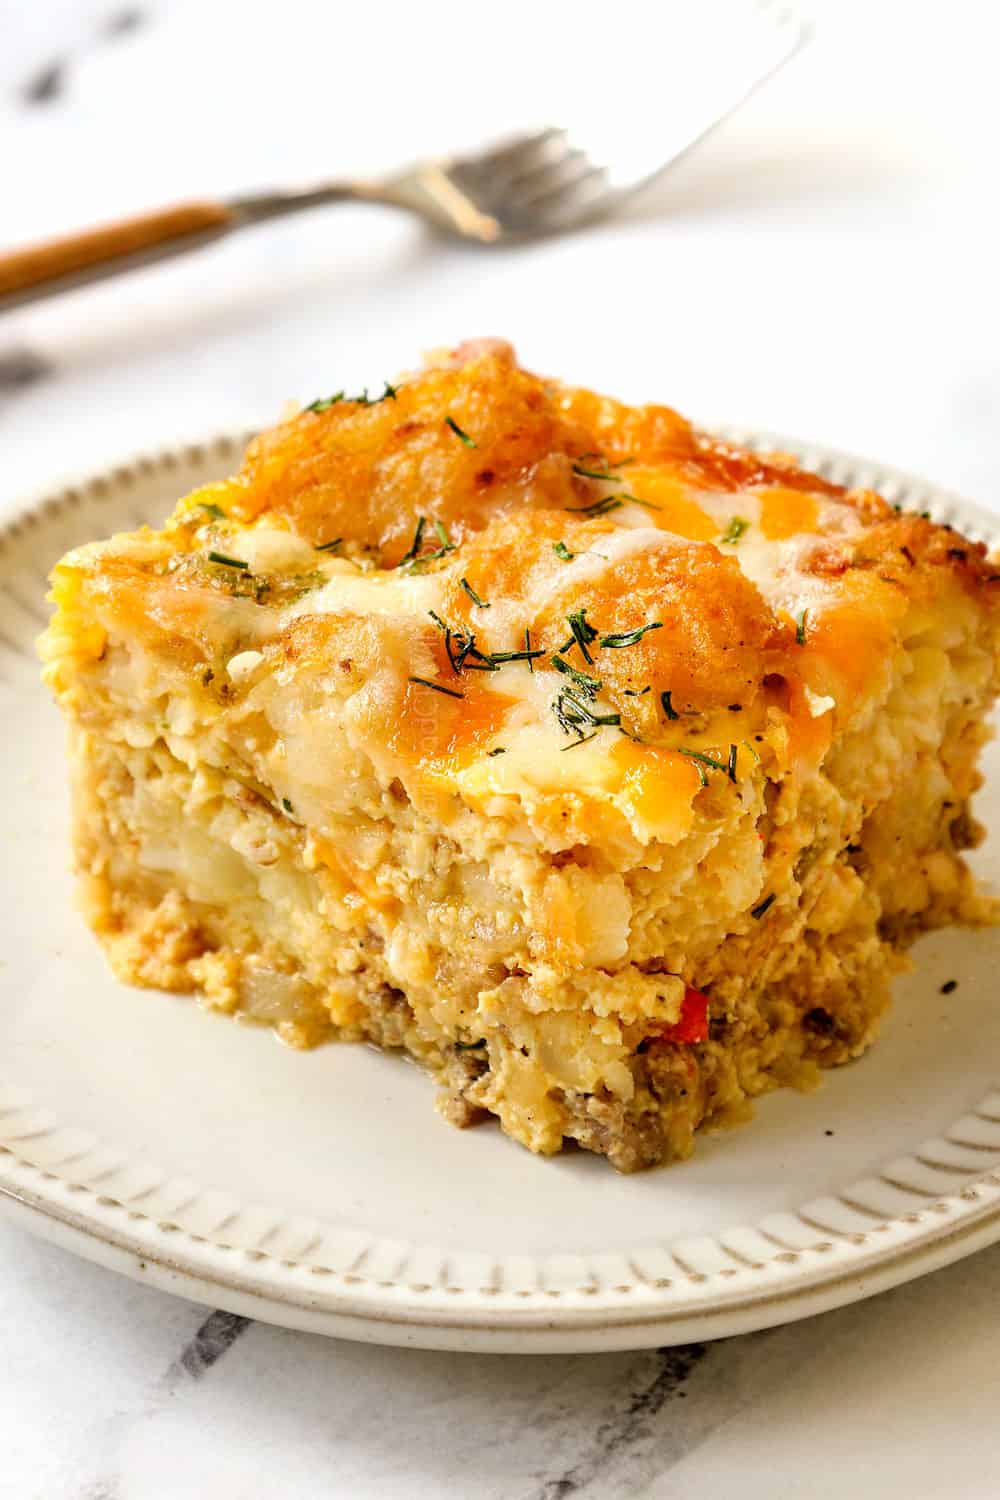 up close of a slice of tater tot breakfast casserole with sausage